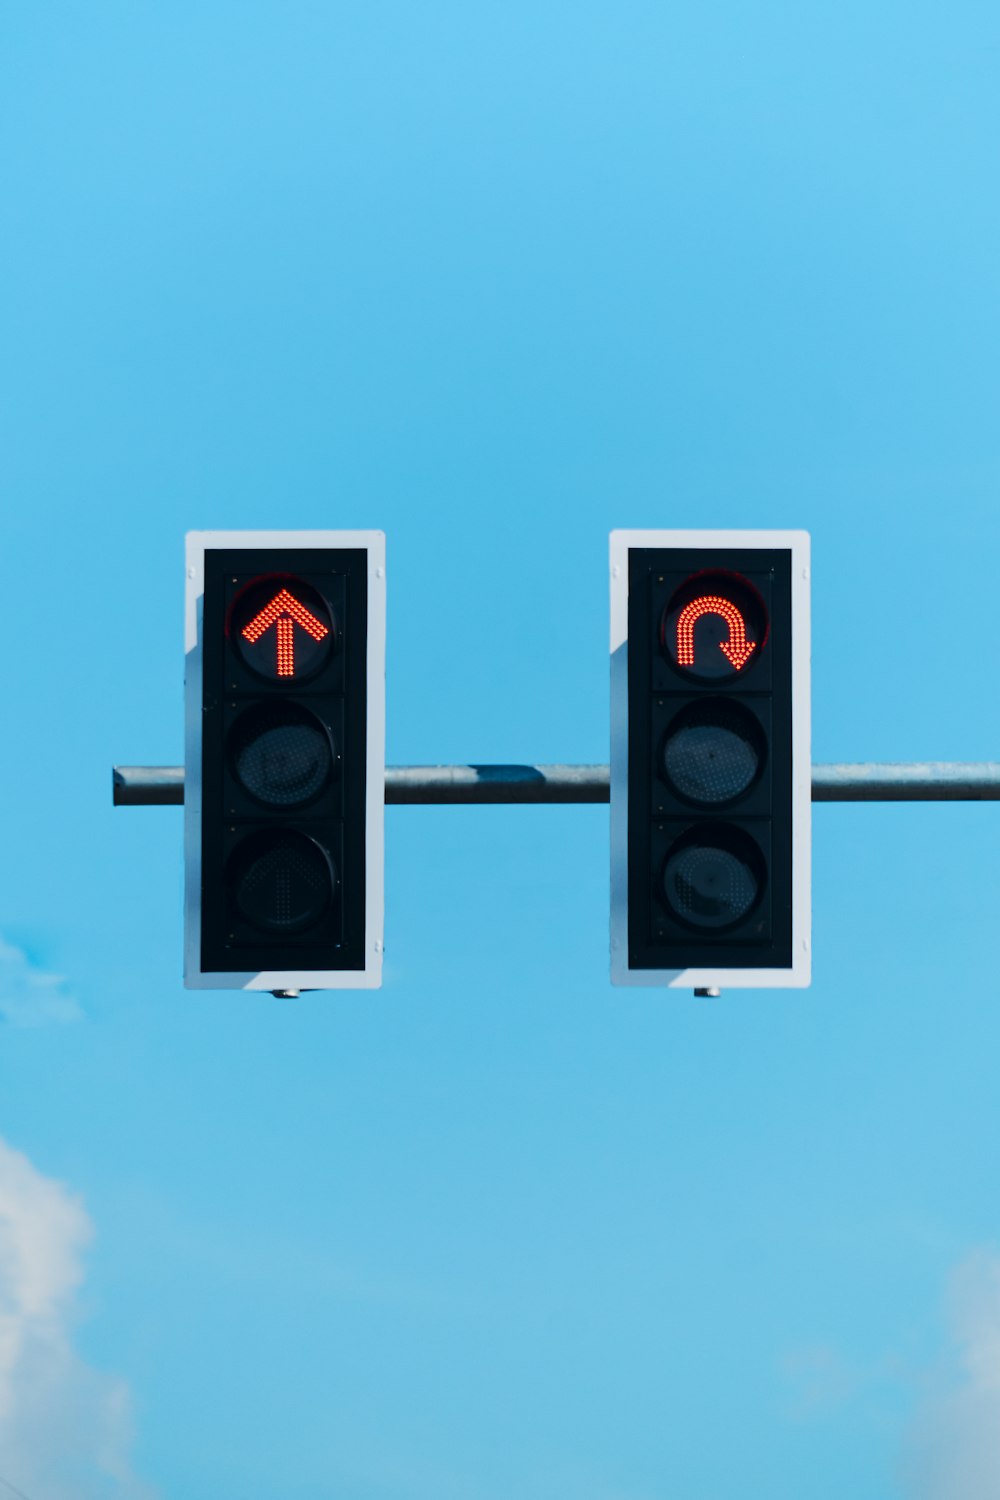 a traffic light with two red arrows on it